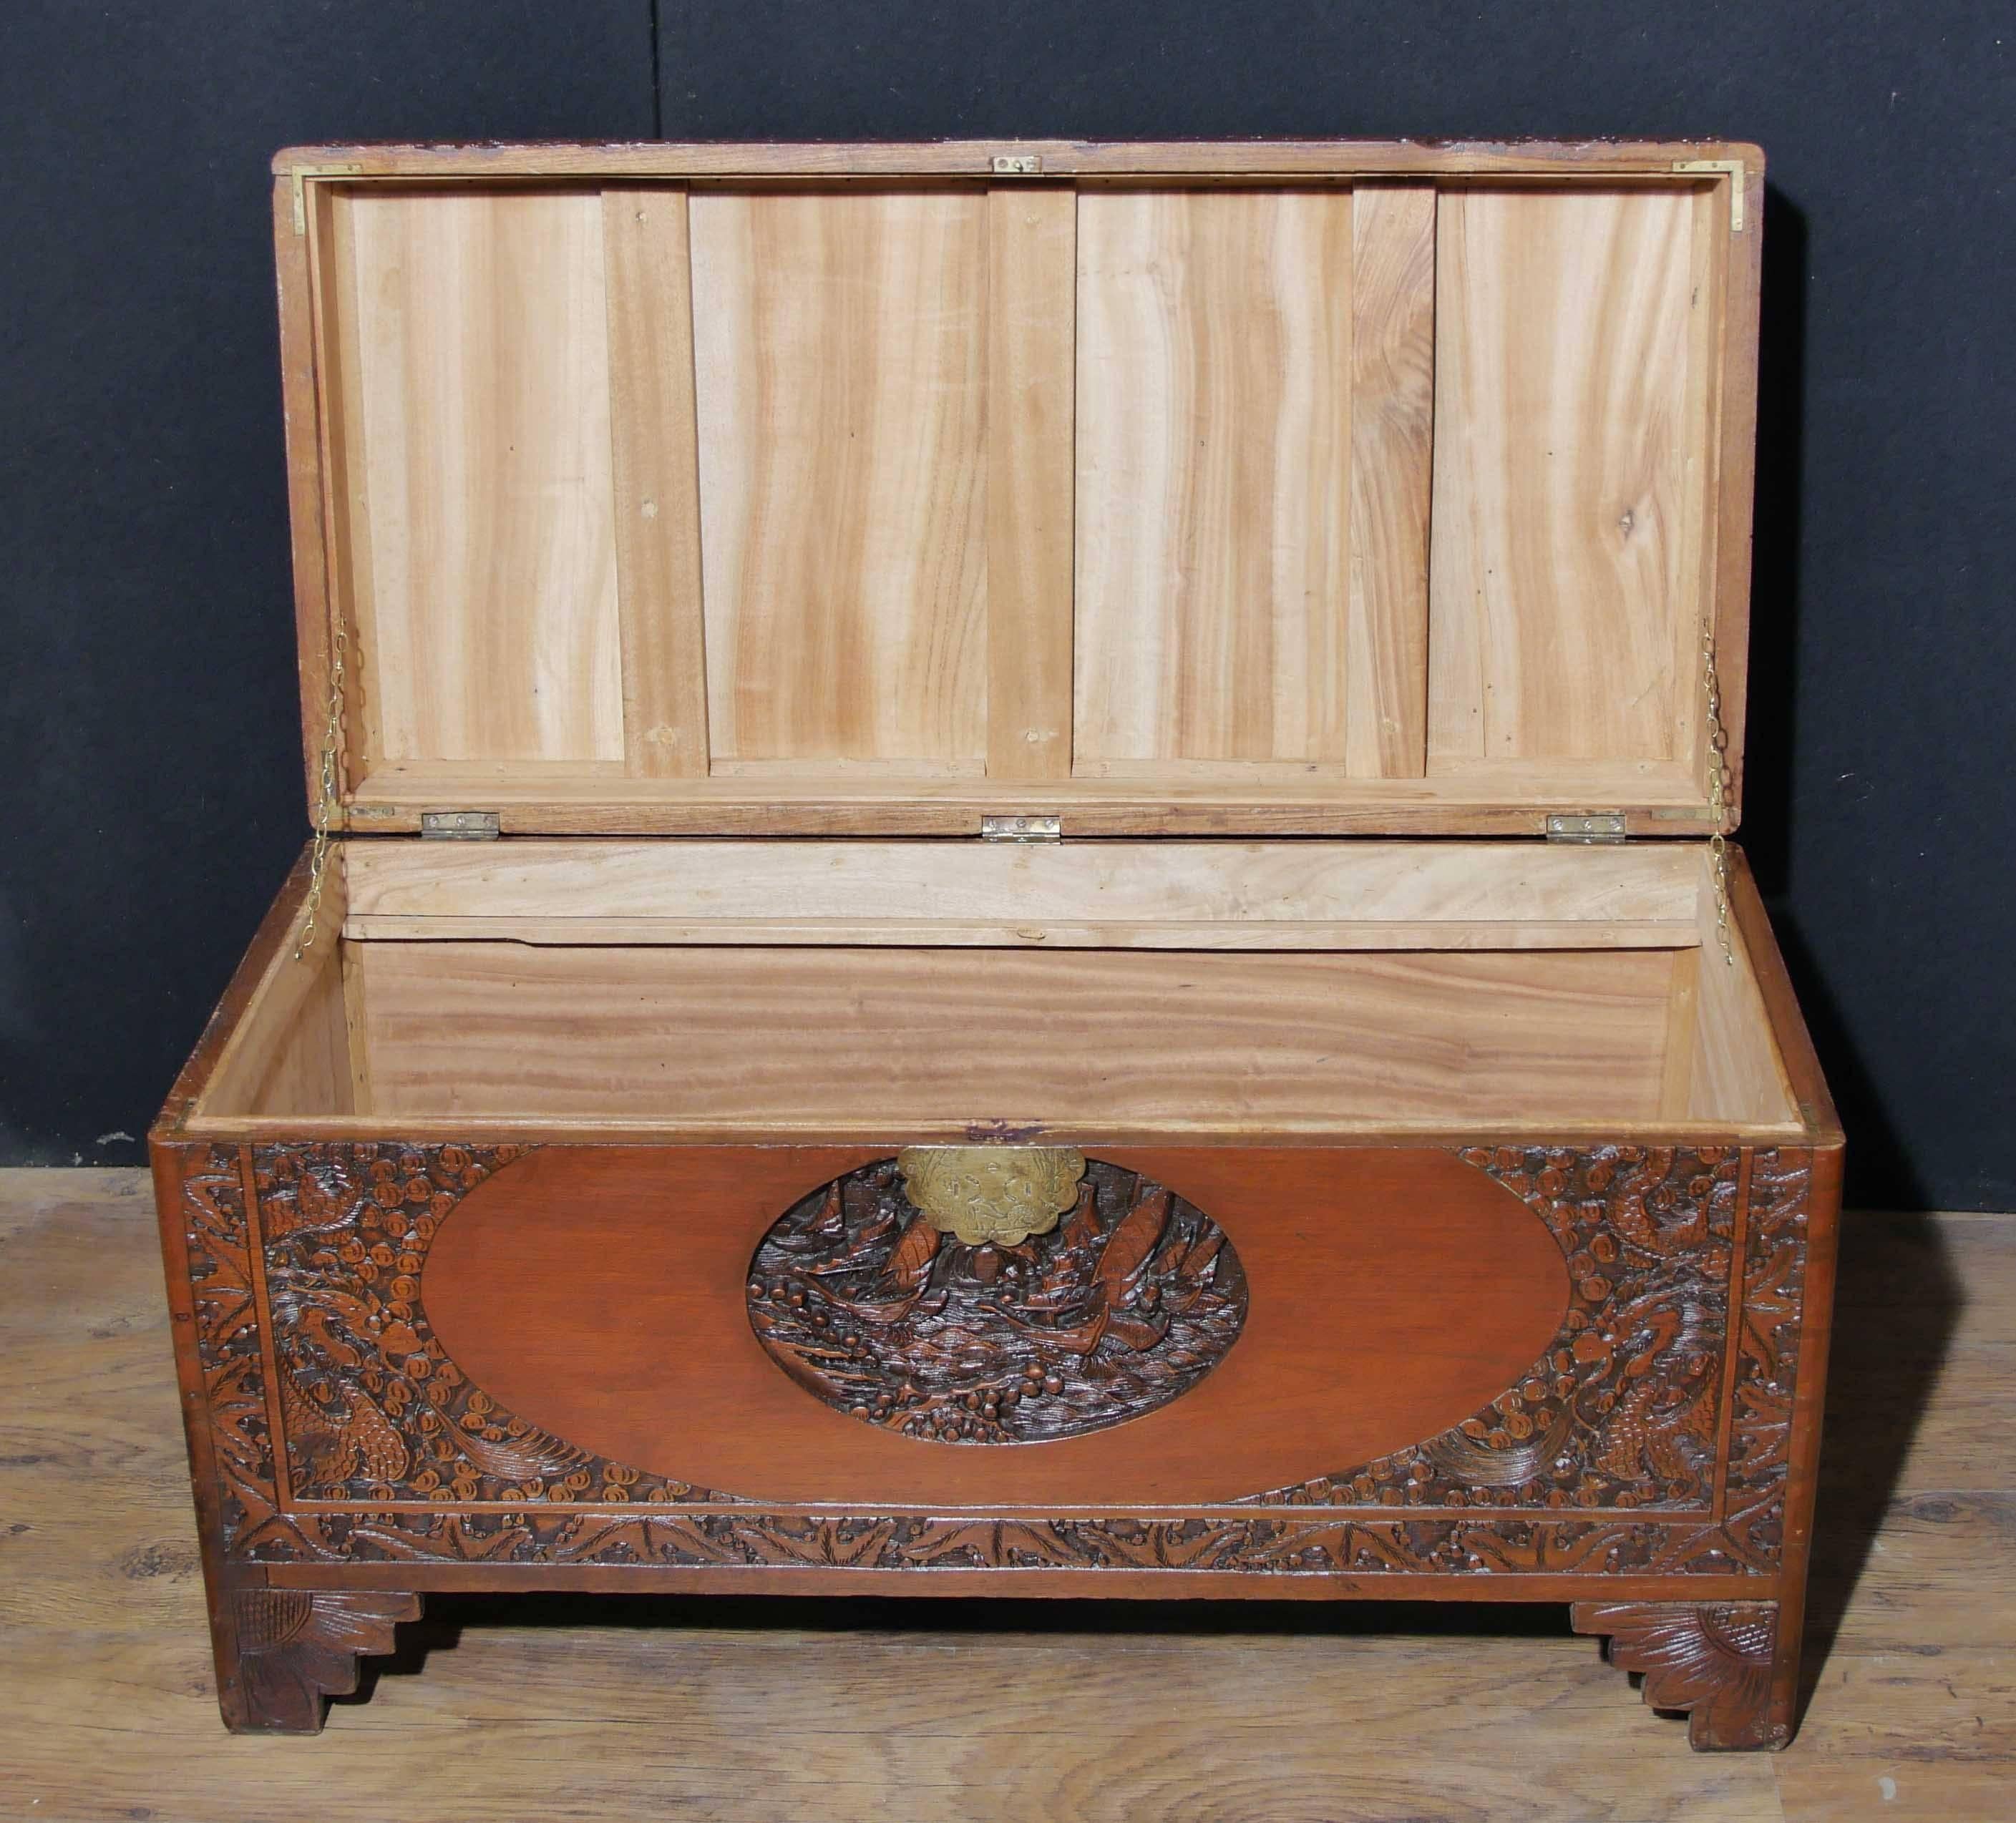 Antique Chinese Carved Camphor Wood Chest Luggage Trunk Table In Good Condition For Sale In Potters Bar, Herts